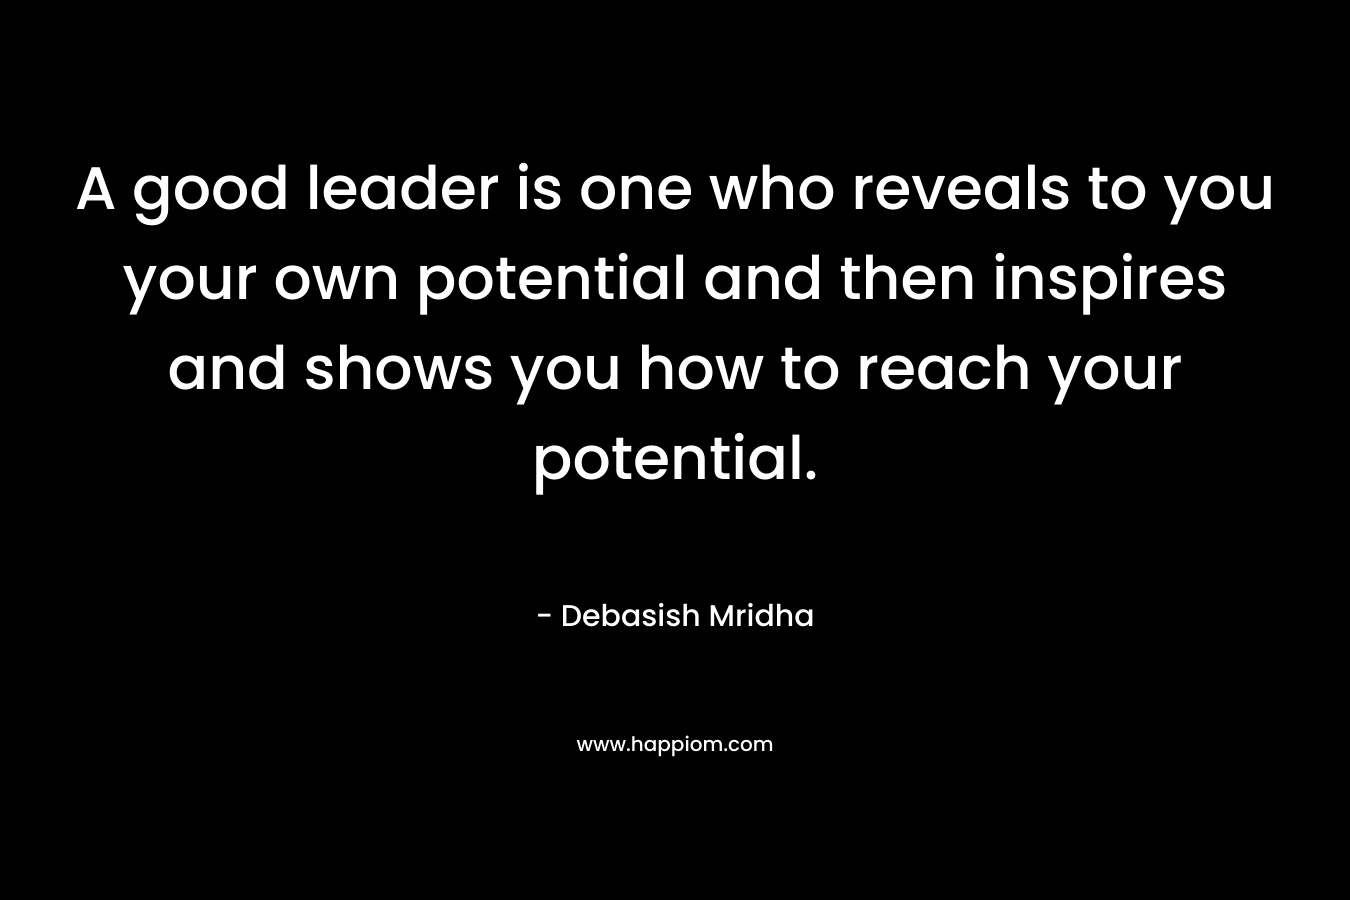 A good leader is one who reveals to you your own potential and then inspires and shows you how to reach your potential. – Debasish Mridha